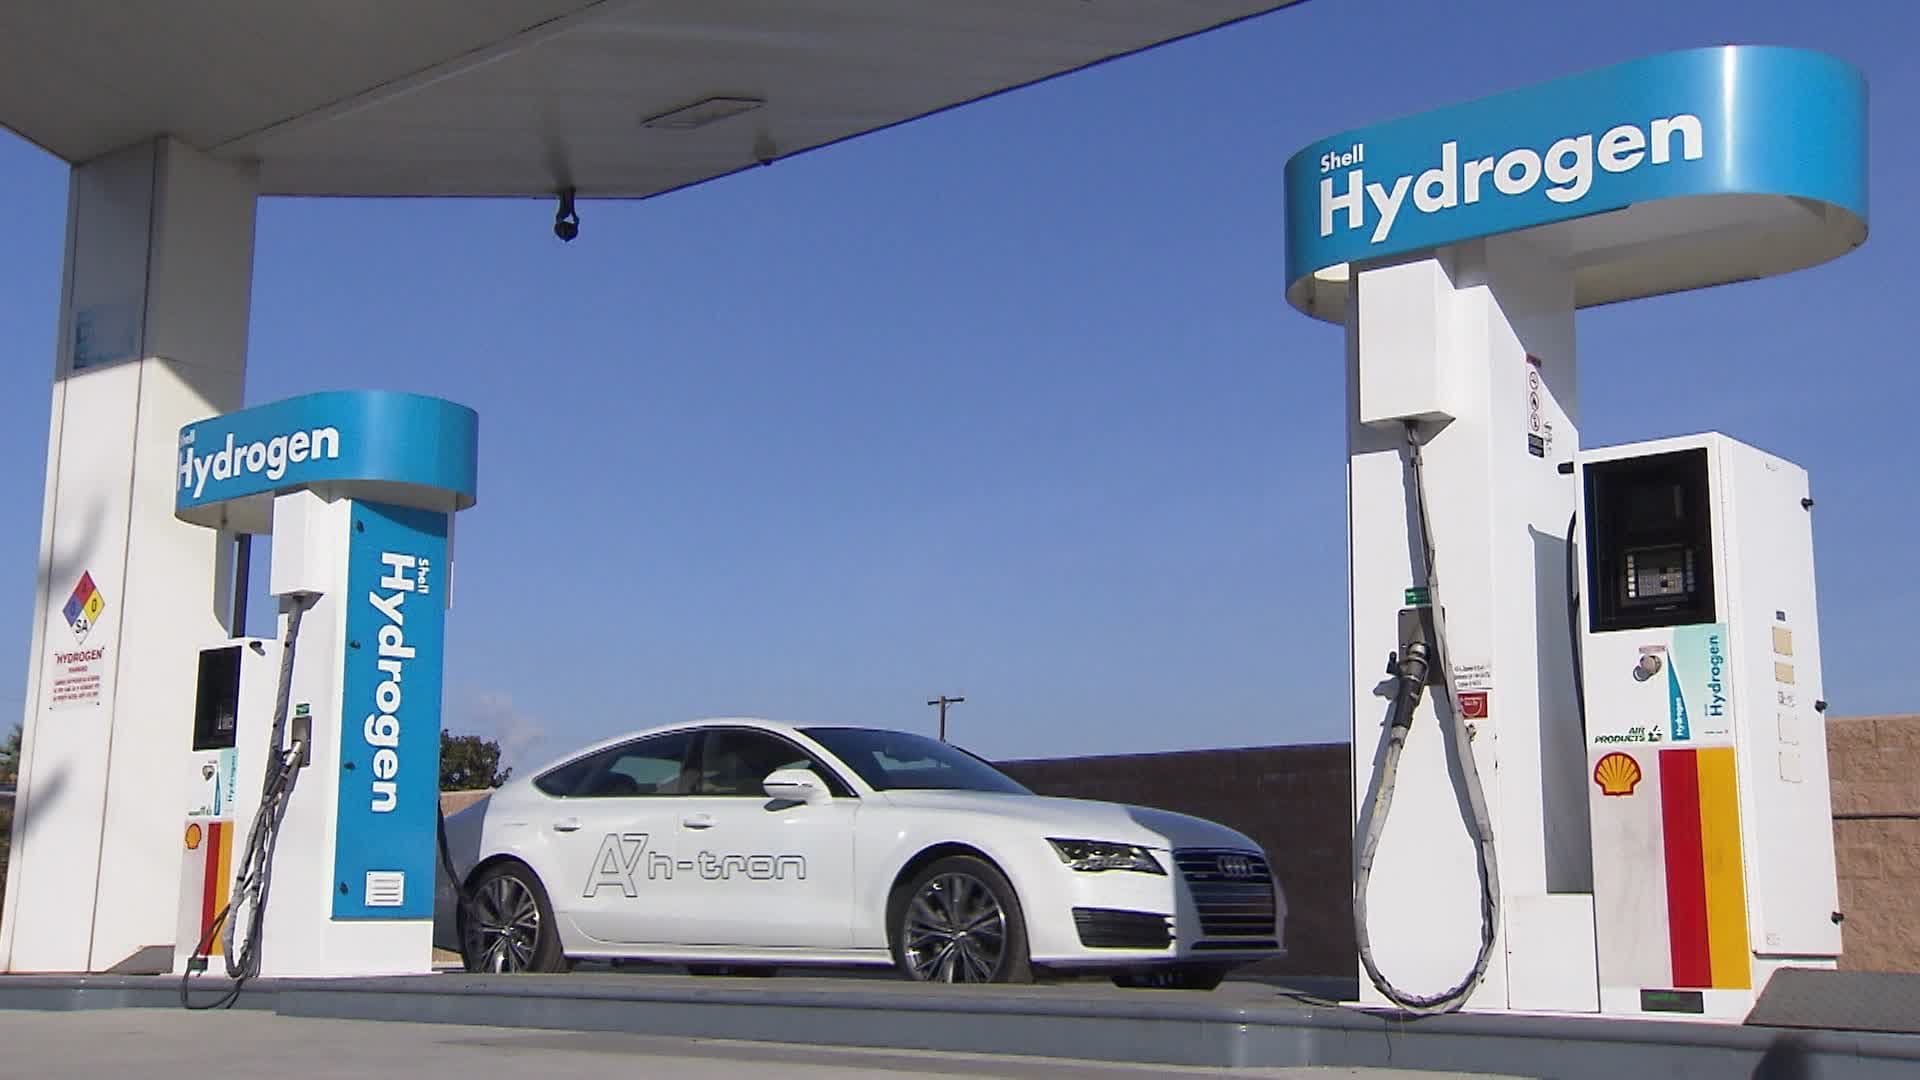 A Major German City Is Working to Adopt Hydrogen Fuel